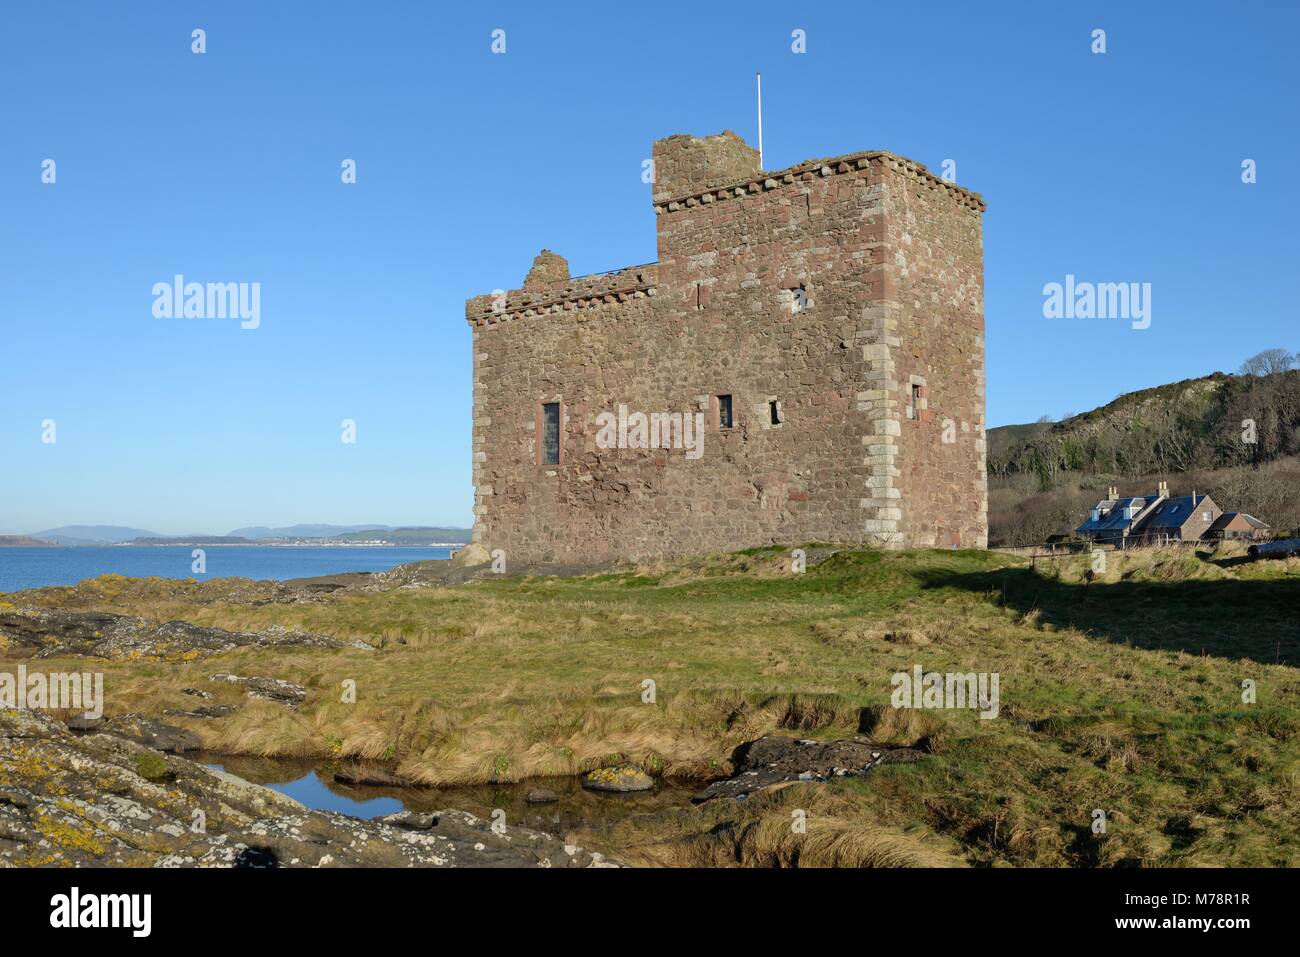 Portencross Castle overlooking the Firth of Clyde, also known as Portincross Castle, situated in Portencross, on the west coast of Scotland, UK Stock Photo